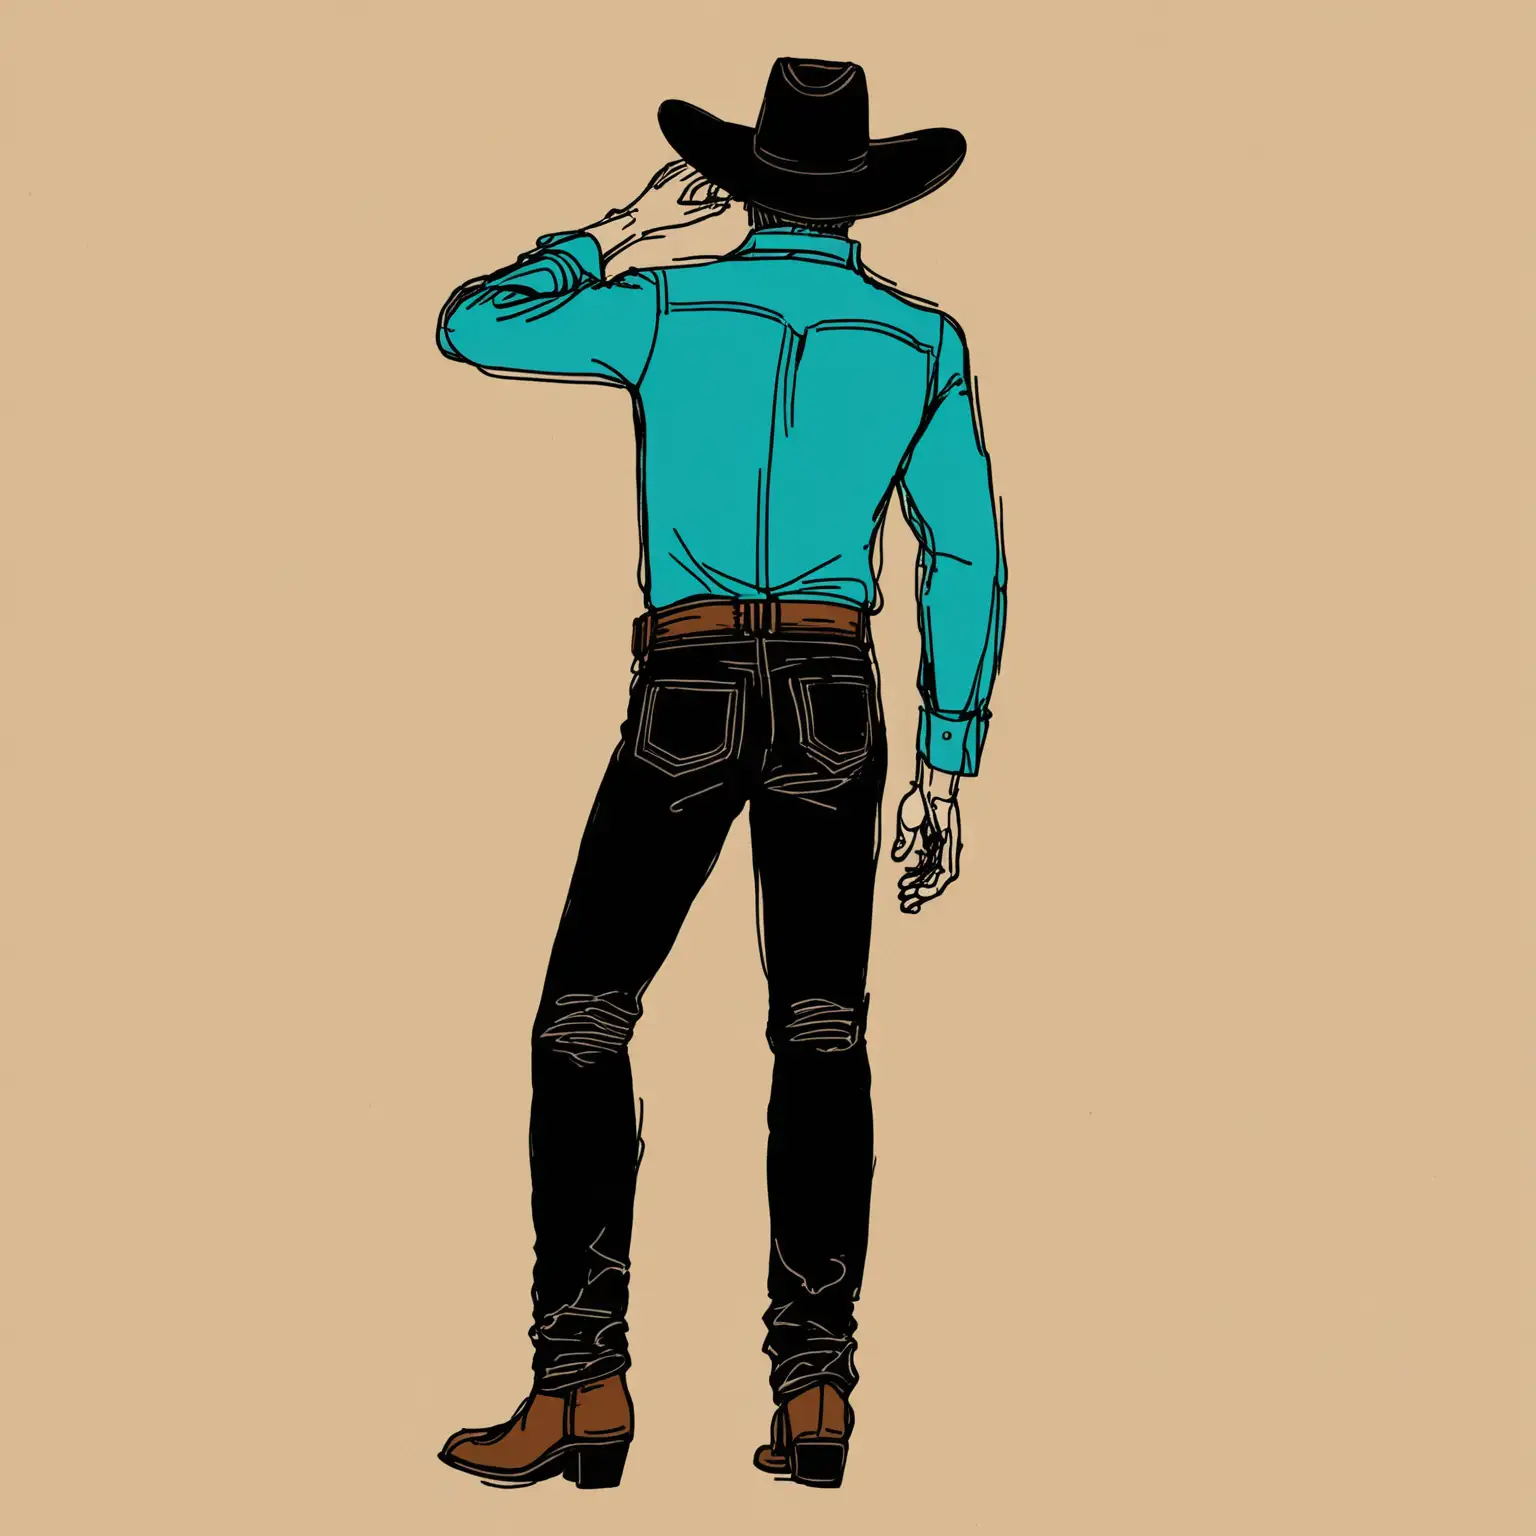 Cowboy Drawing with Teal Shirt and Black Hat